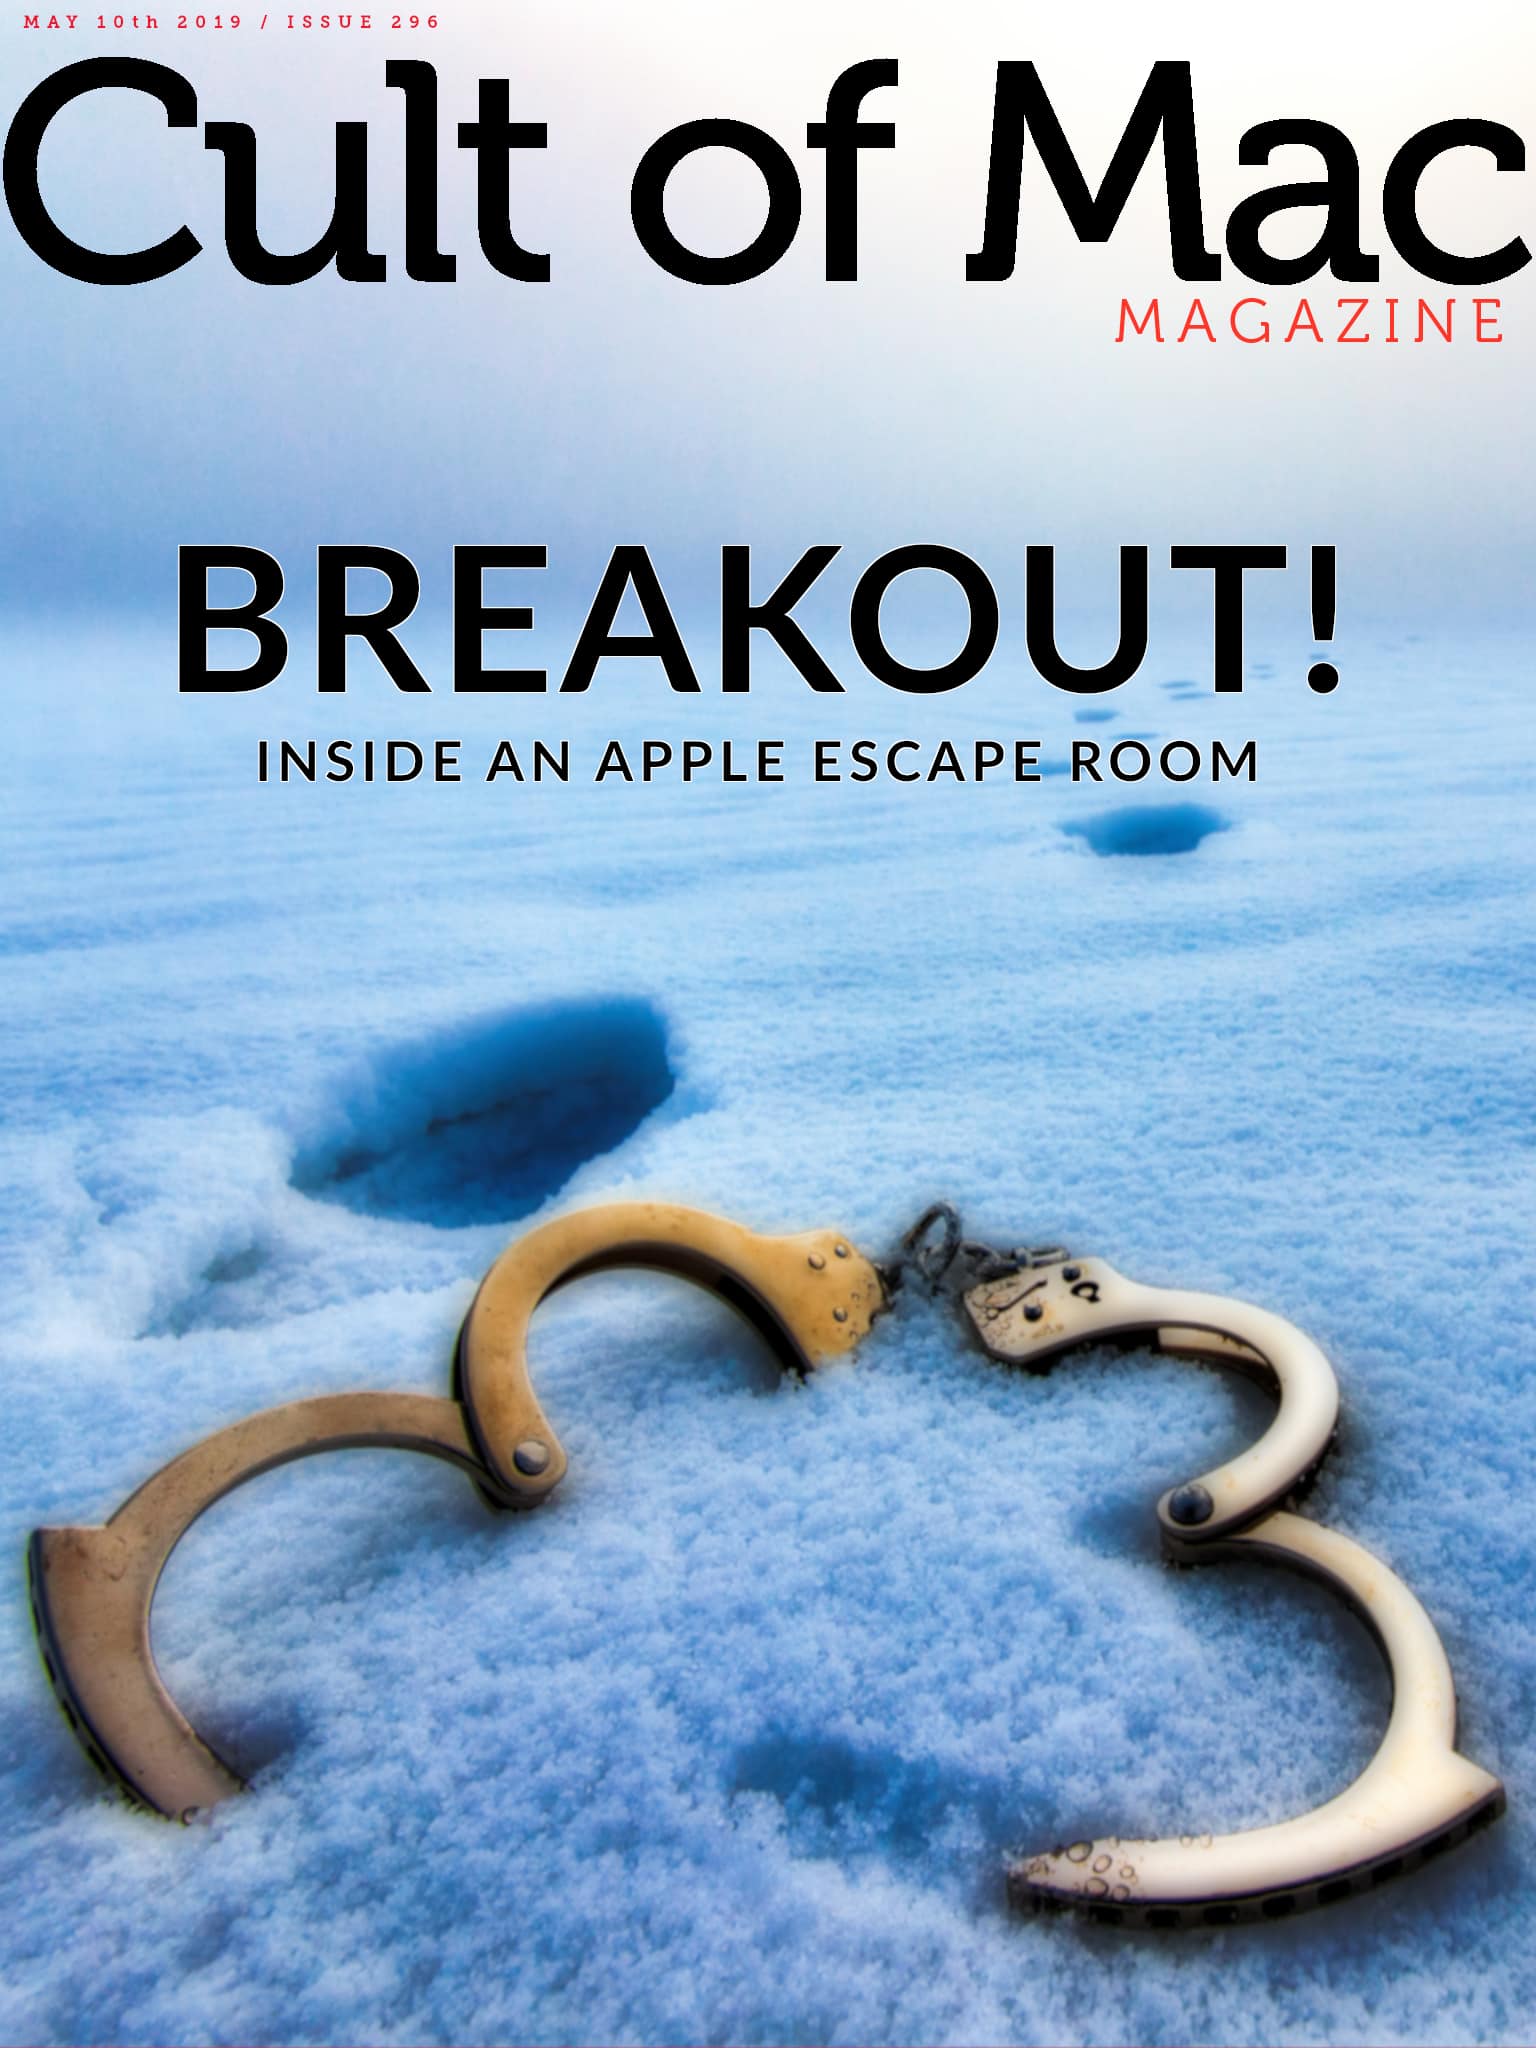 An unusual Apple-themed escape room is set to inject some fun into this year's AltConf during WWDC.